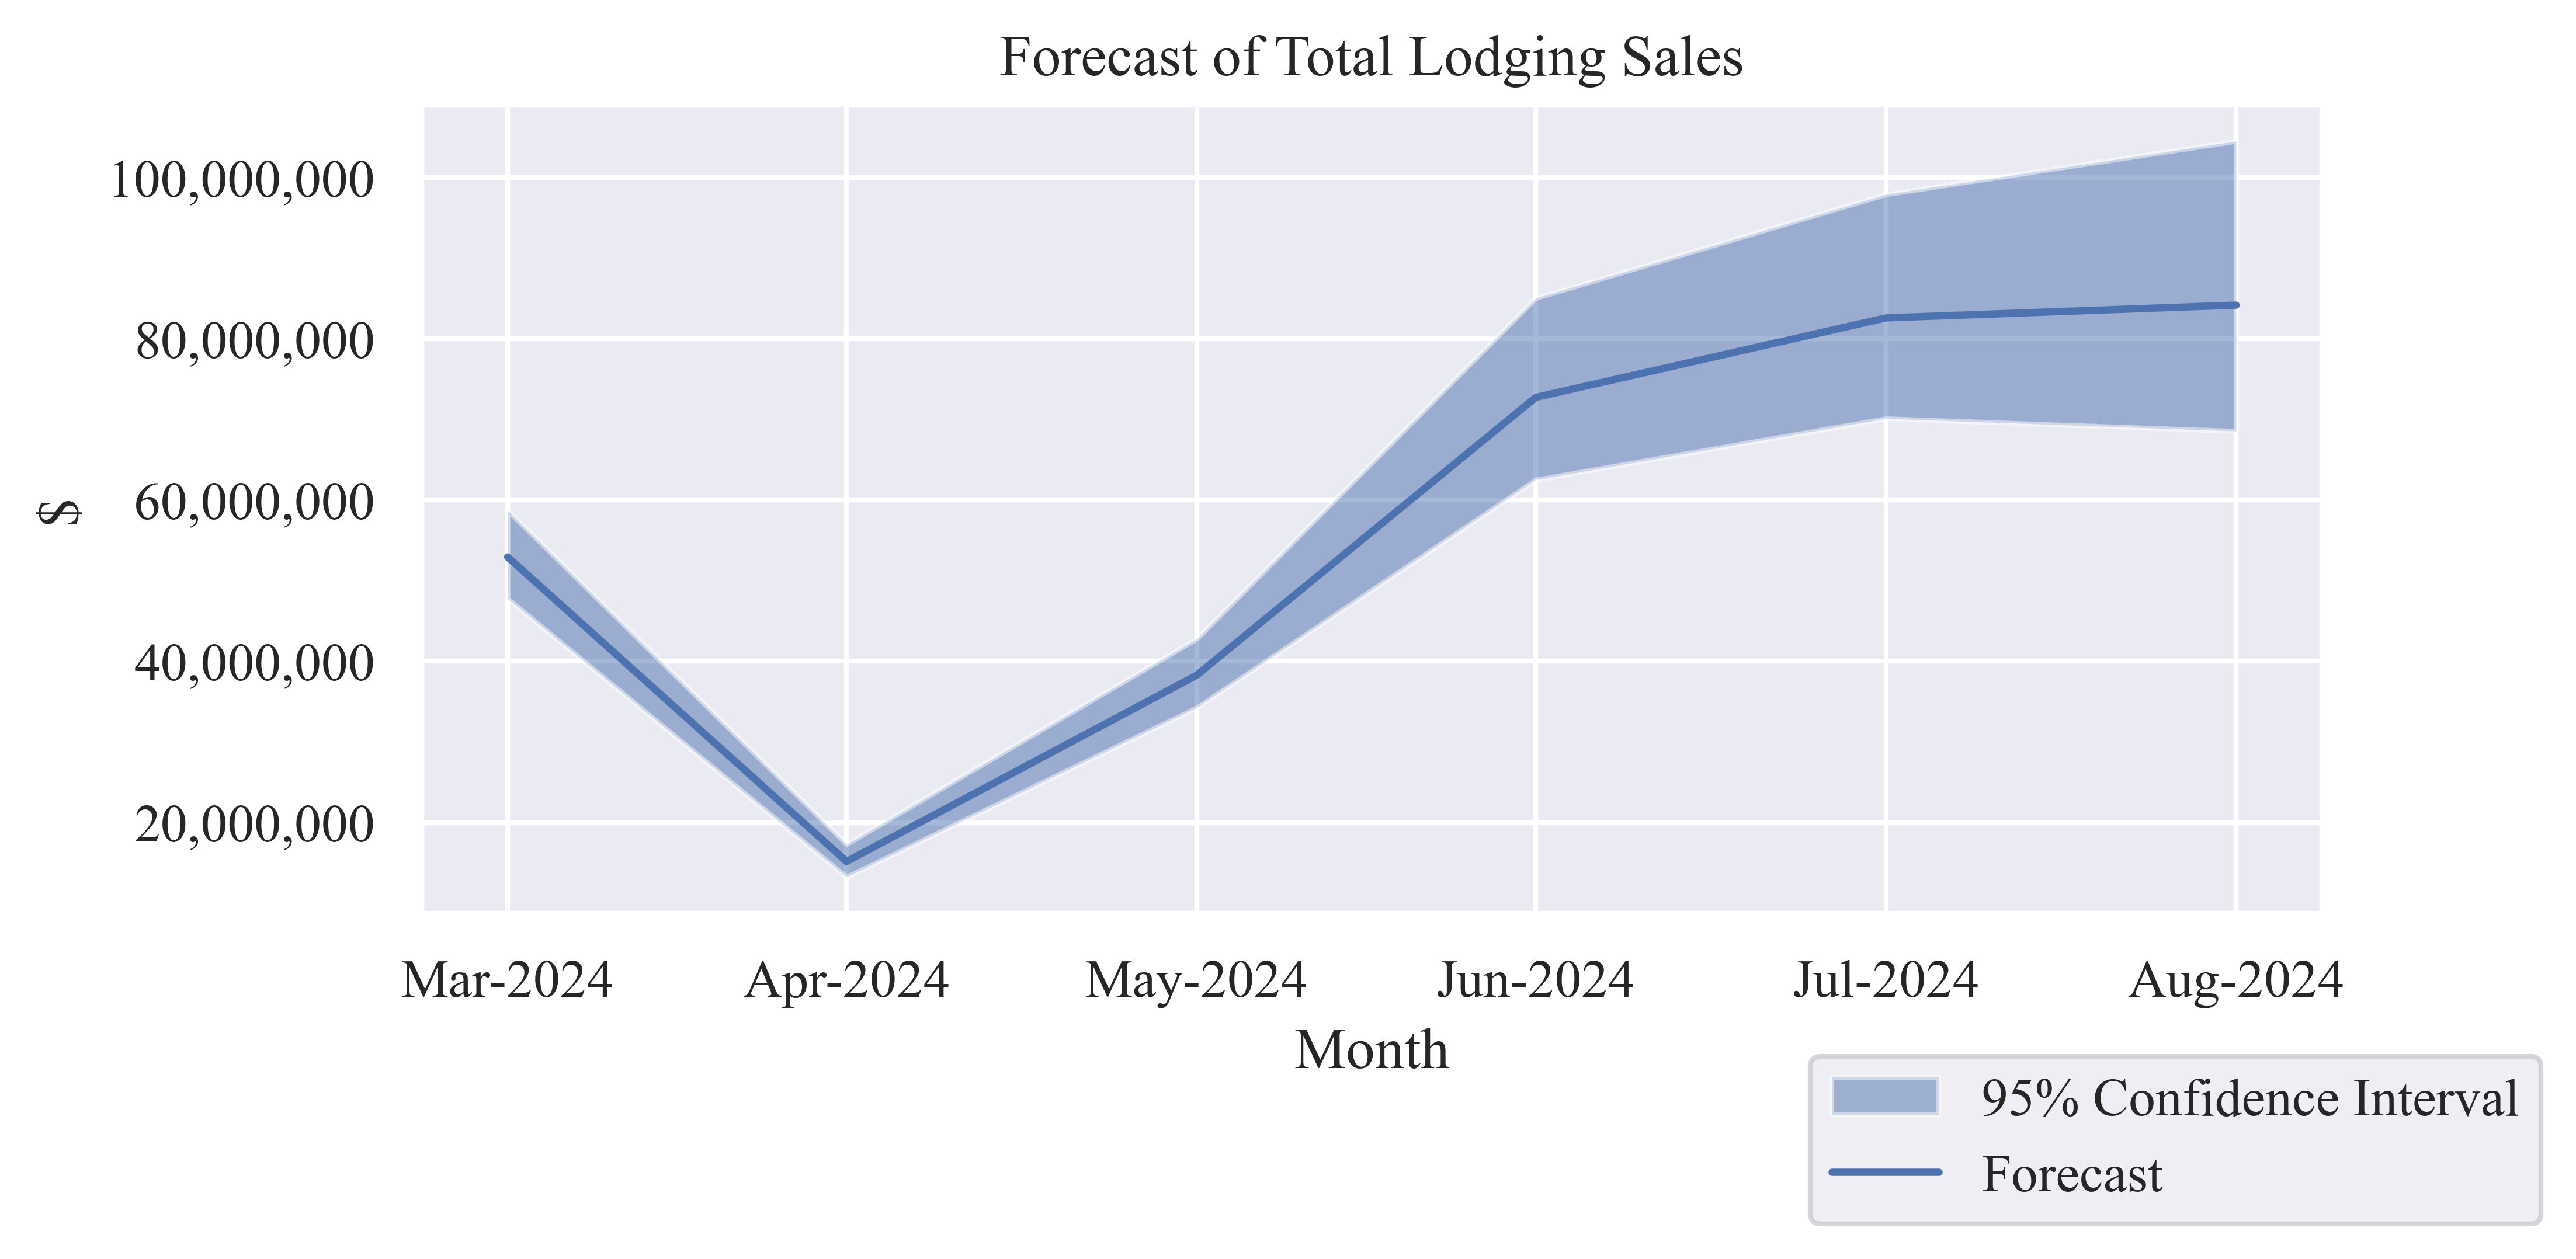 Table 7: Forecast of Monthly Lodging Sales